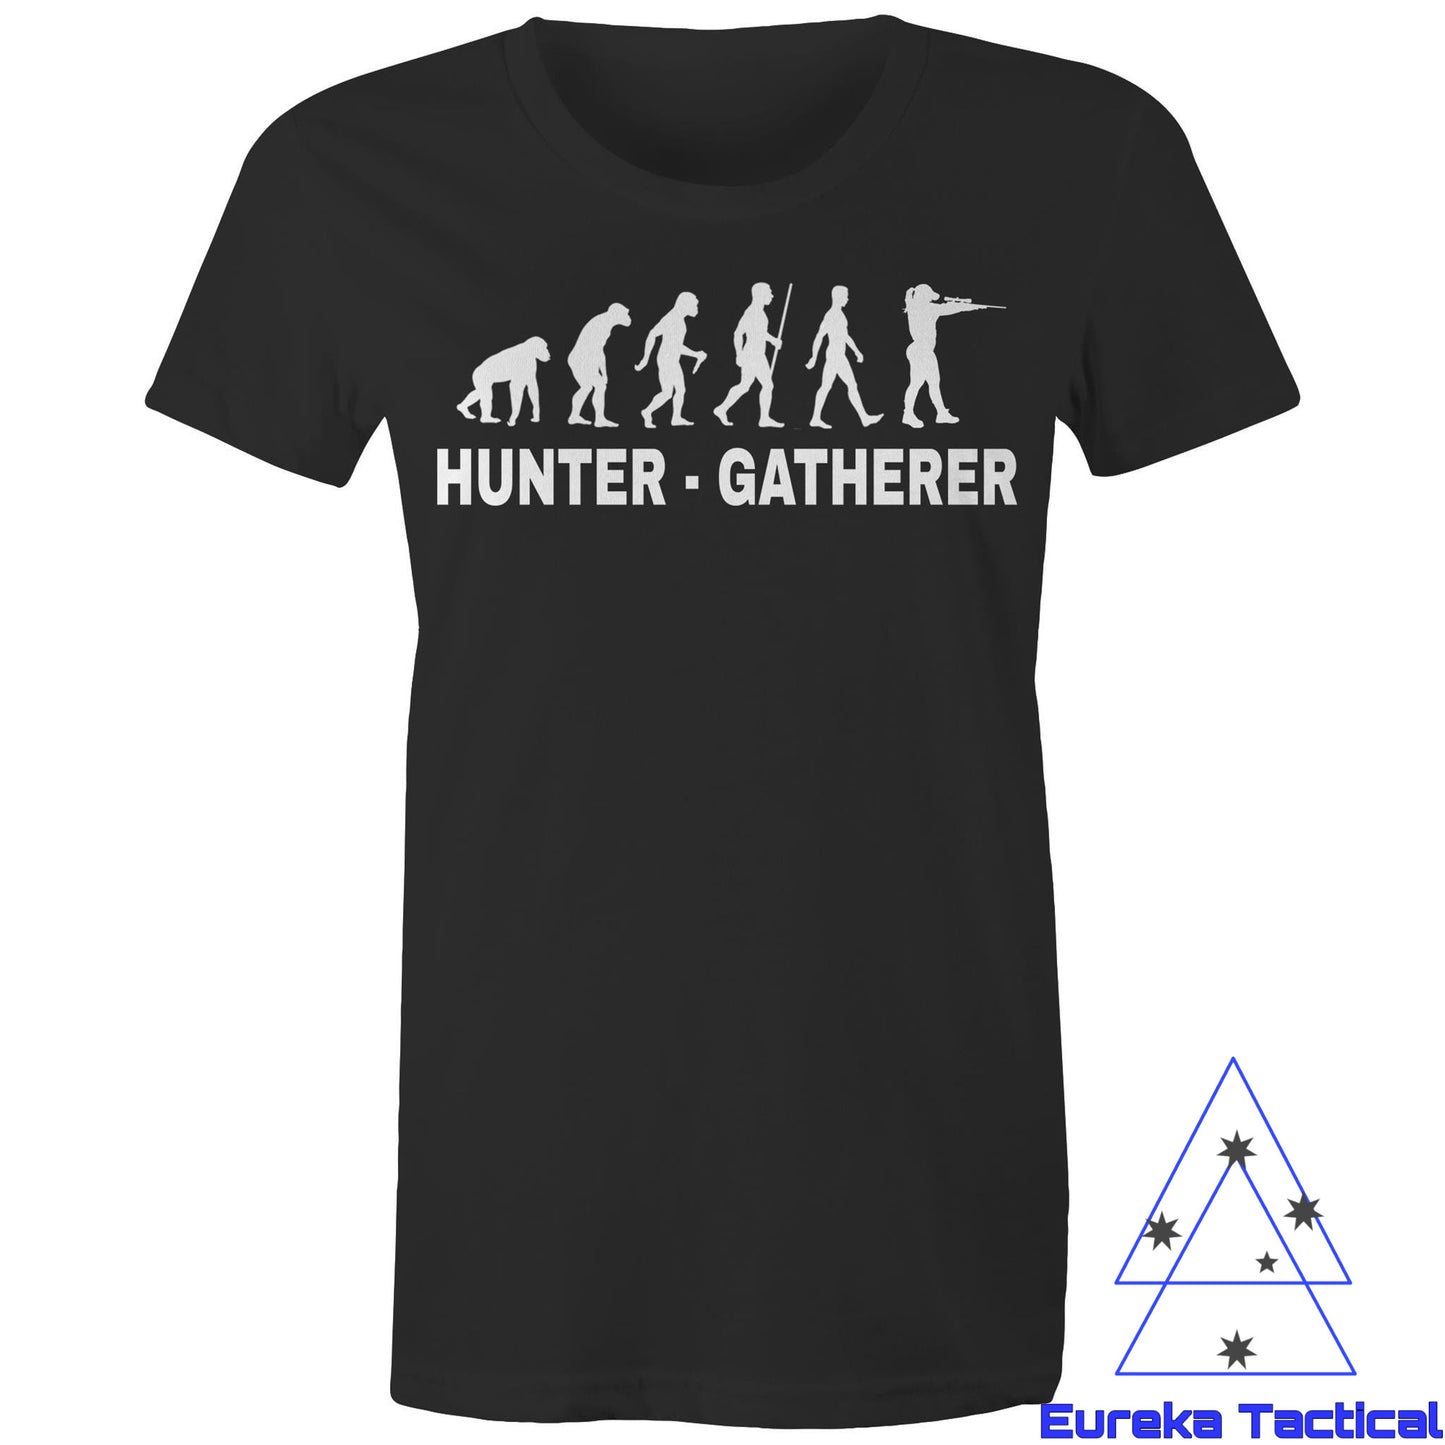 Hunter Gatherer - Firearms. AS Color 100% cotton women's maple tee. Now with female model